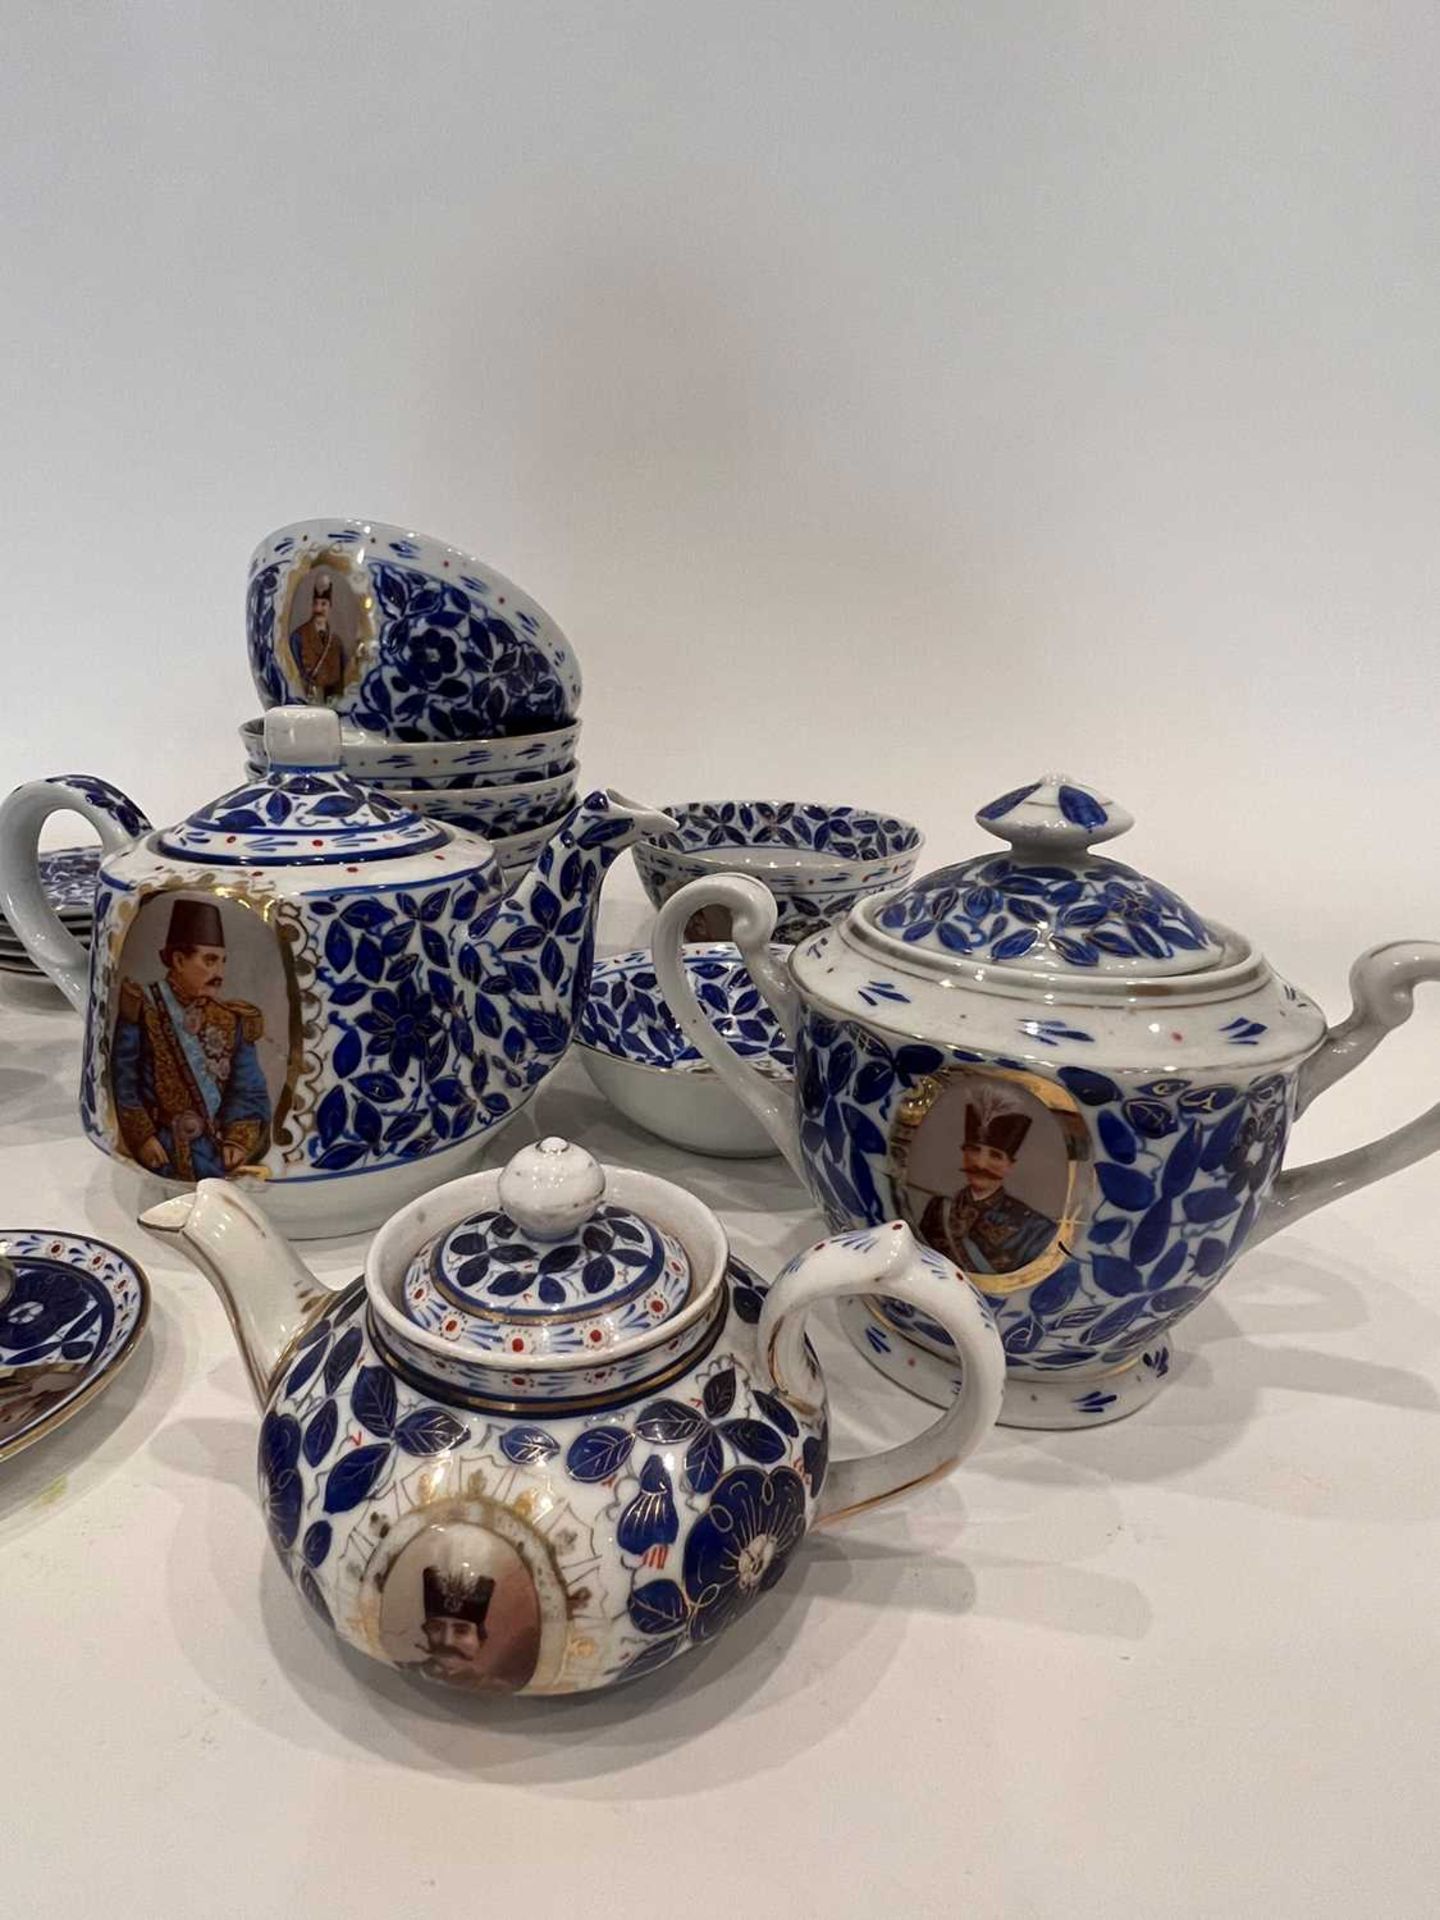 A PORCELAIN TEA AND COFFEE SET MADE FOR THE PERSIAN MARKET - Image 4 of 8